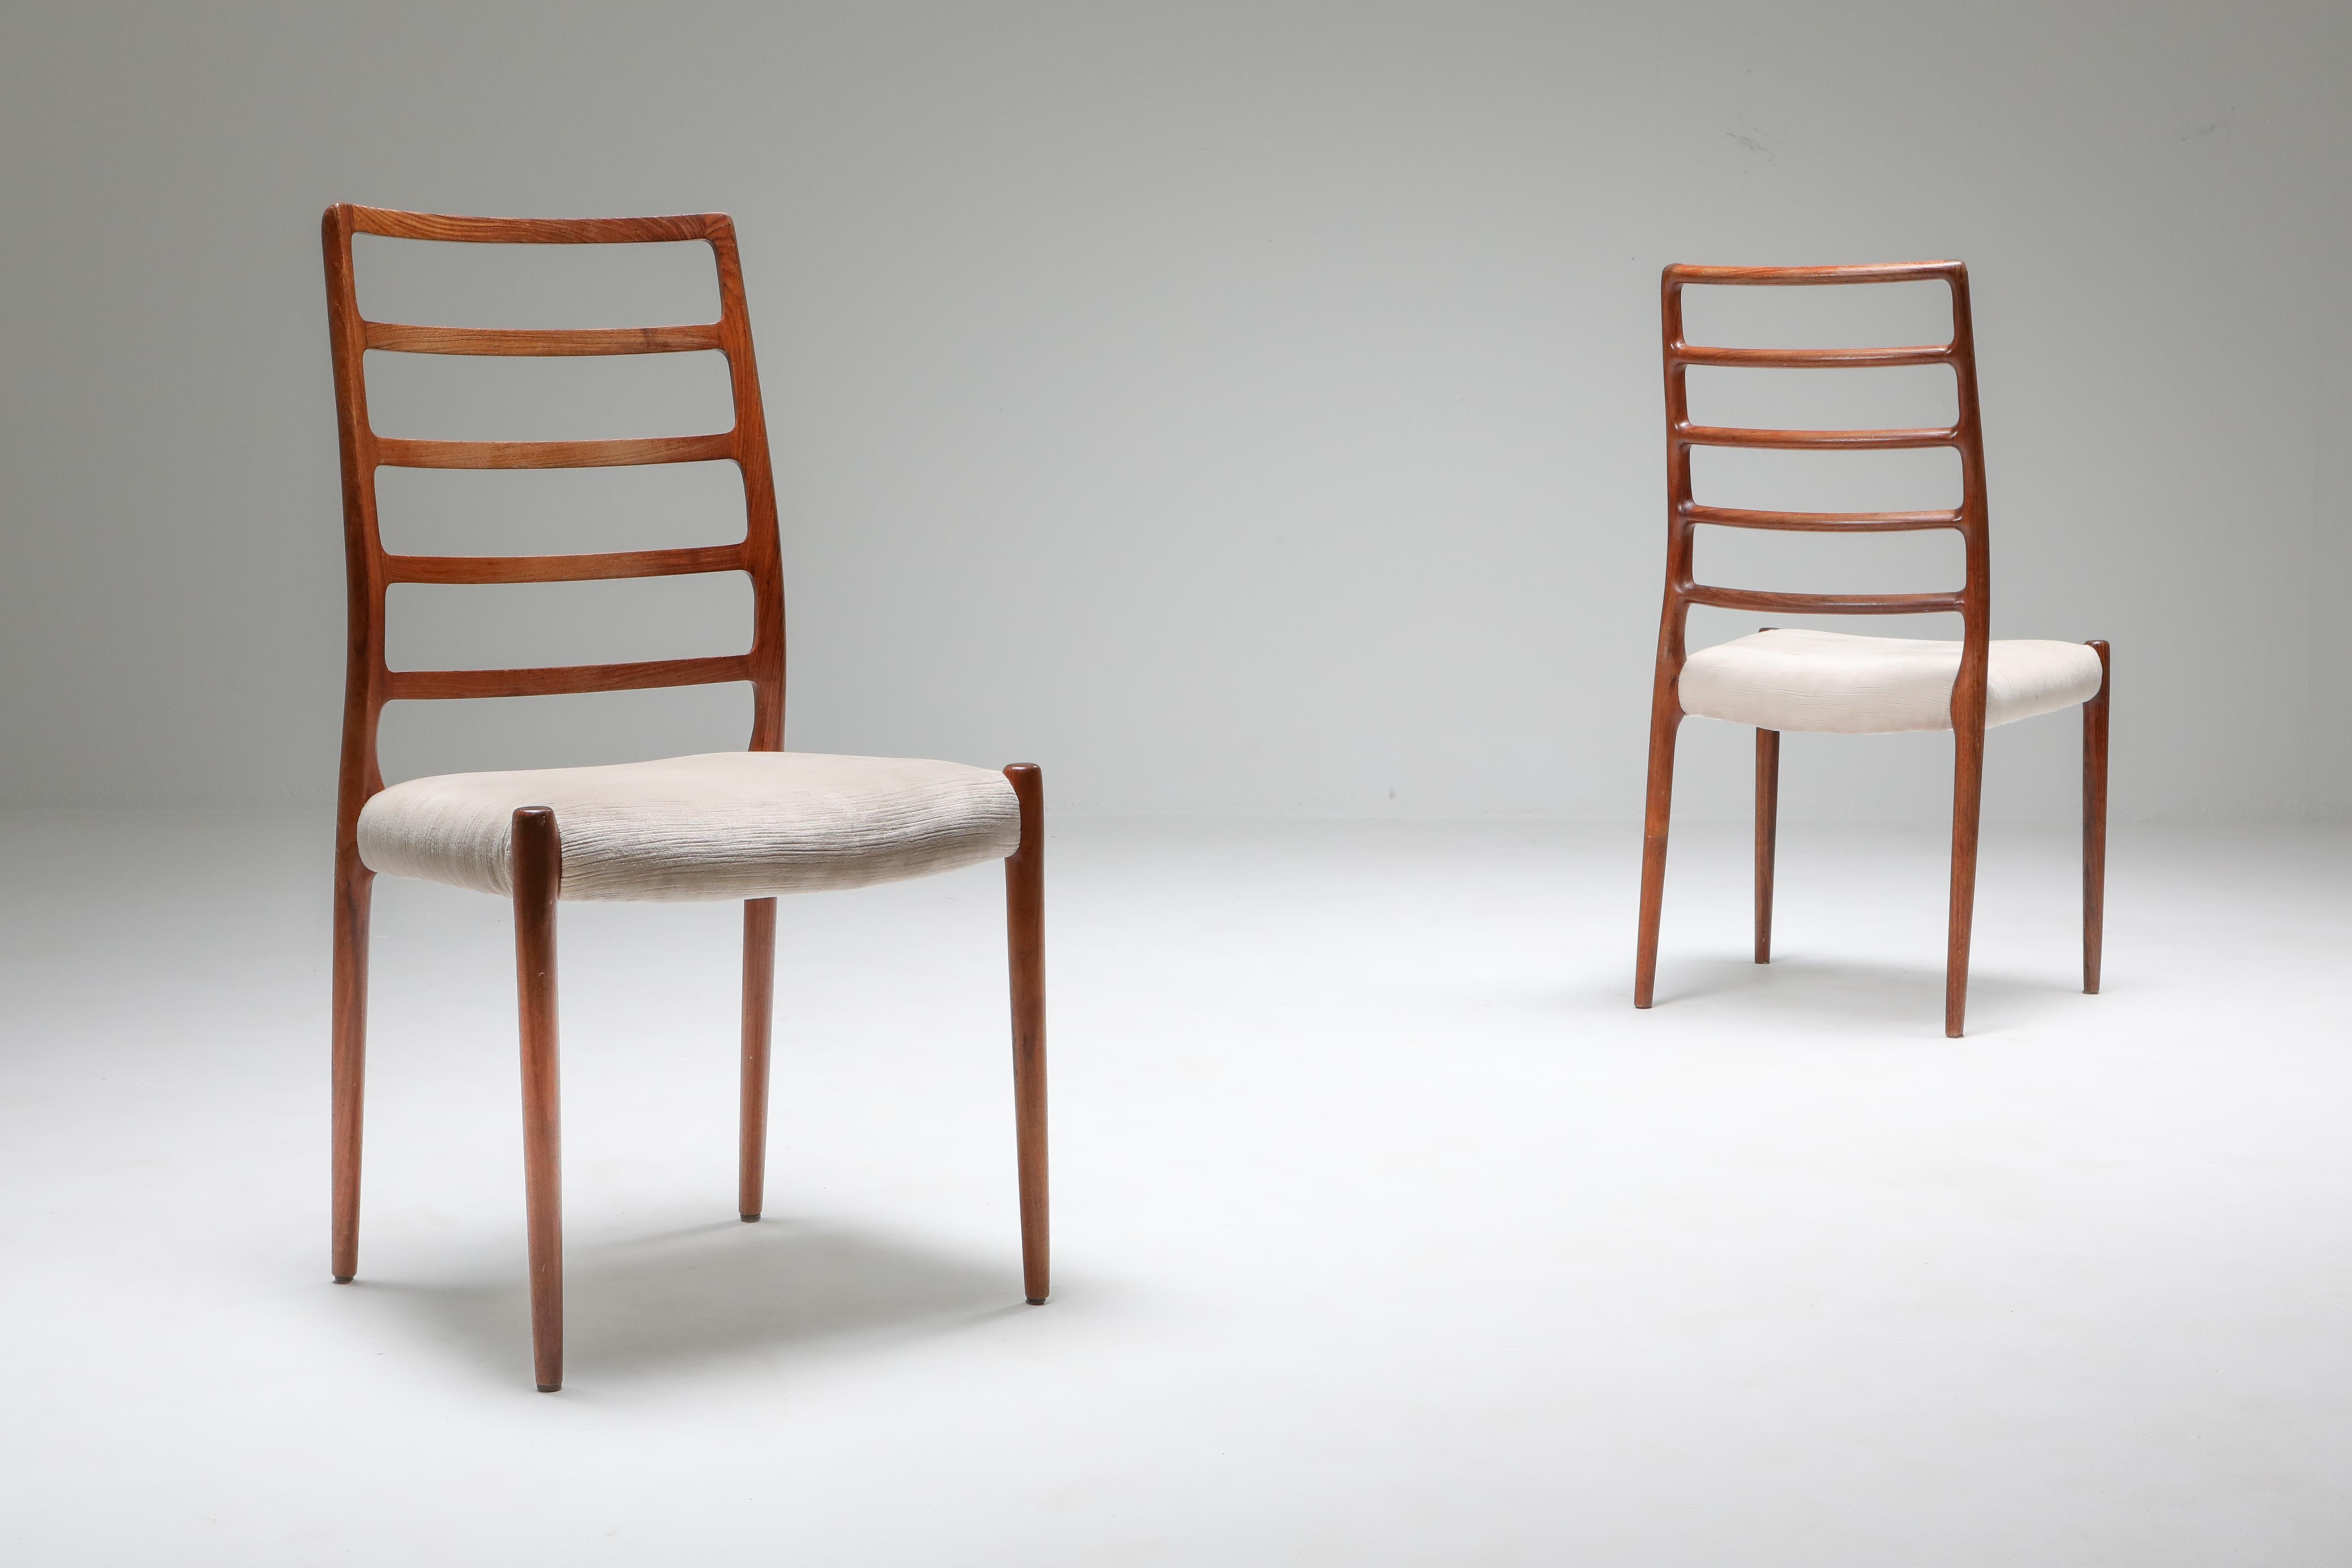 20th Century Danish Rosewood Dining Chairs, circa 1970 by Niels Møller